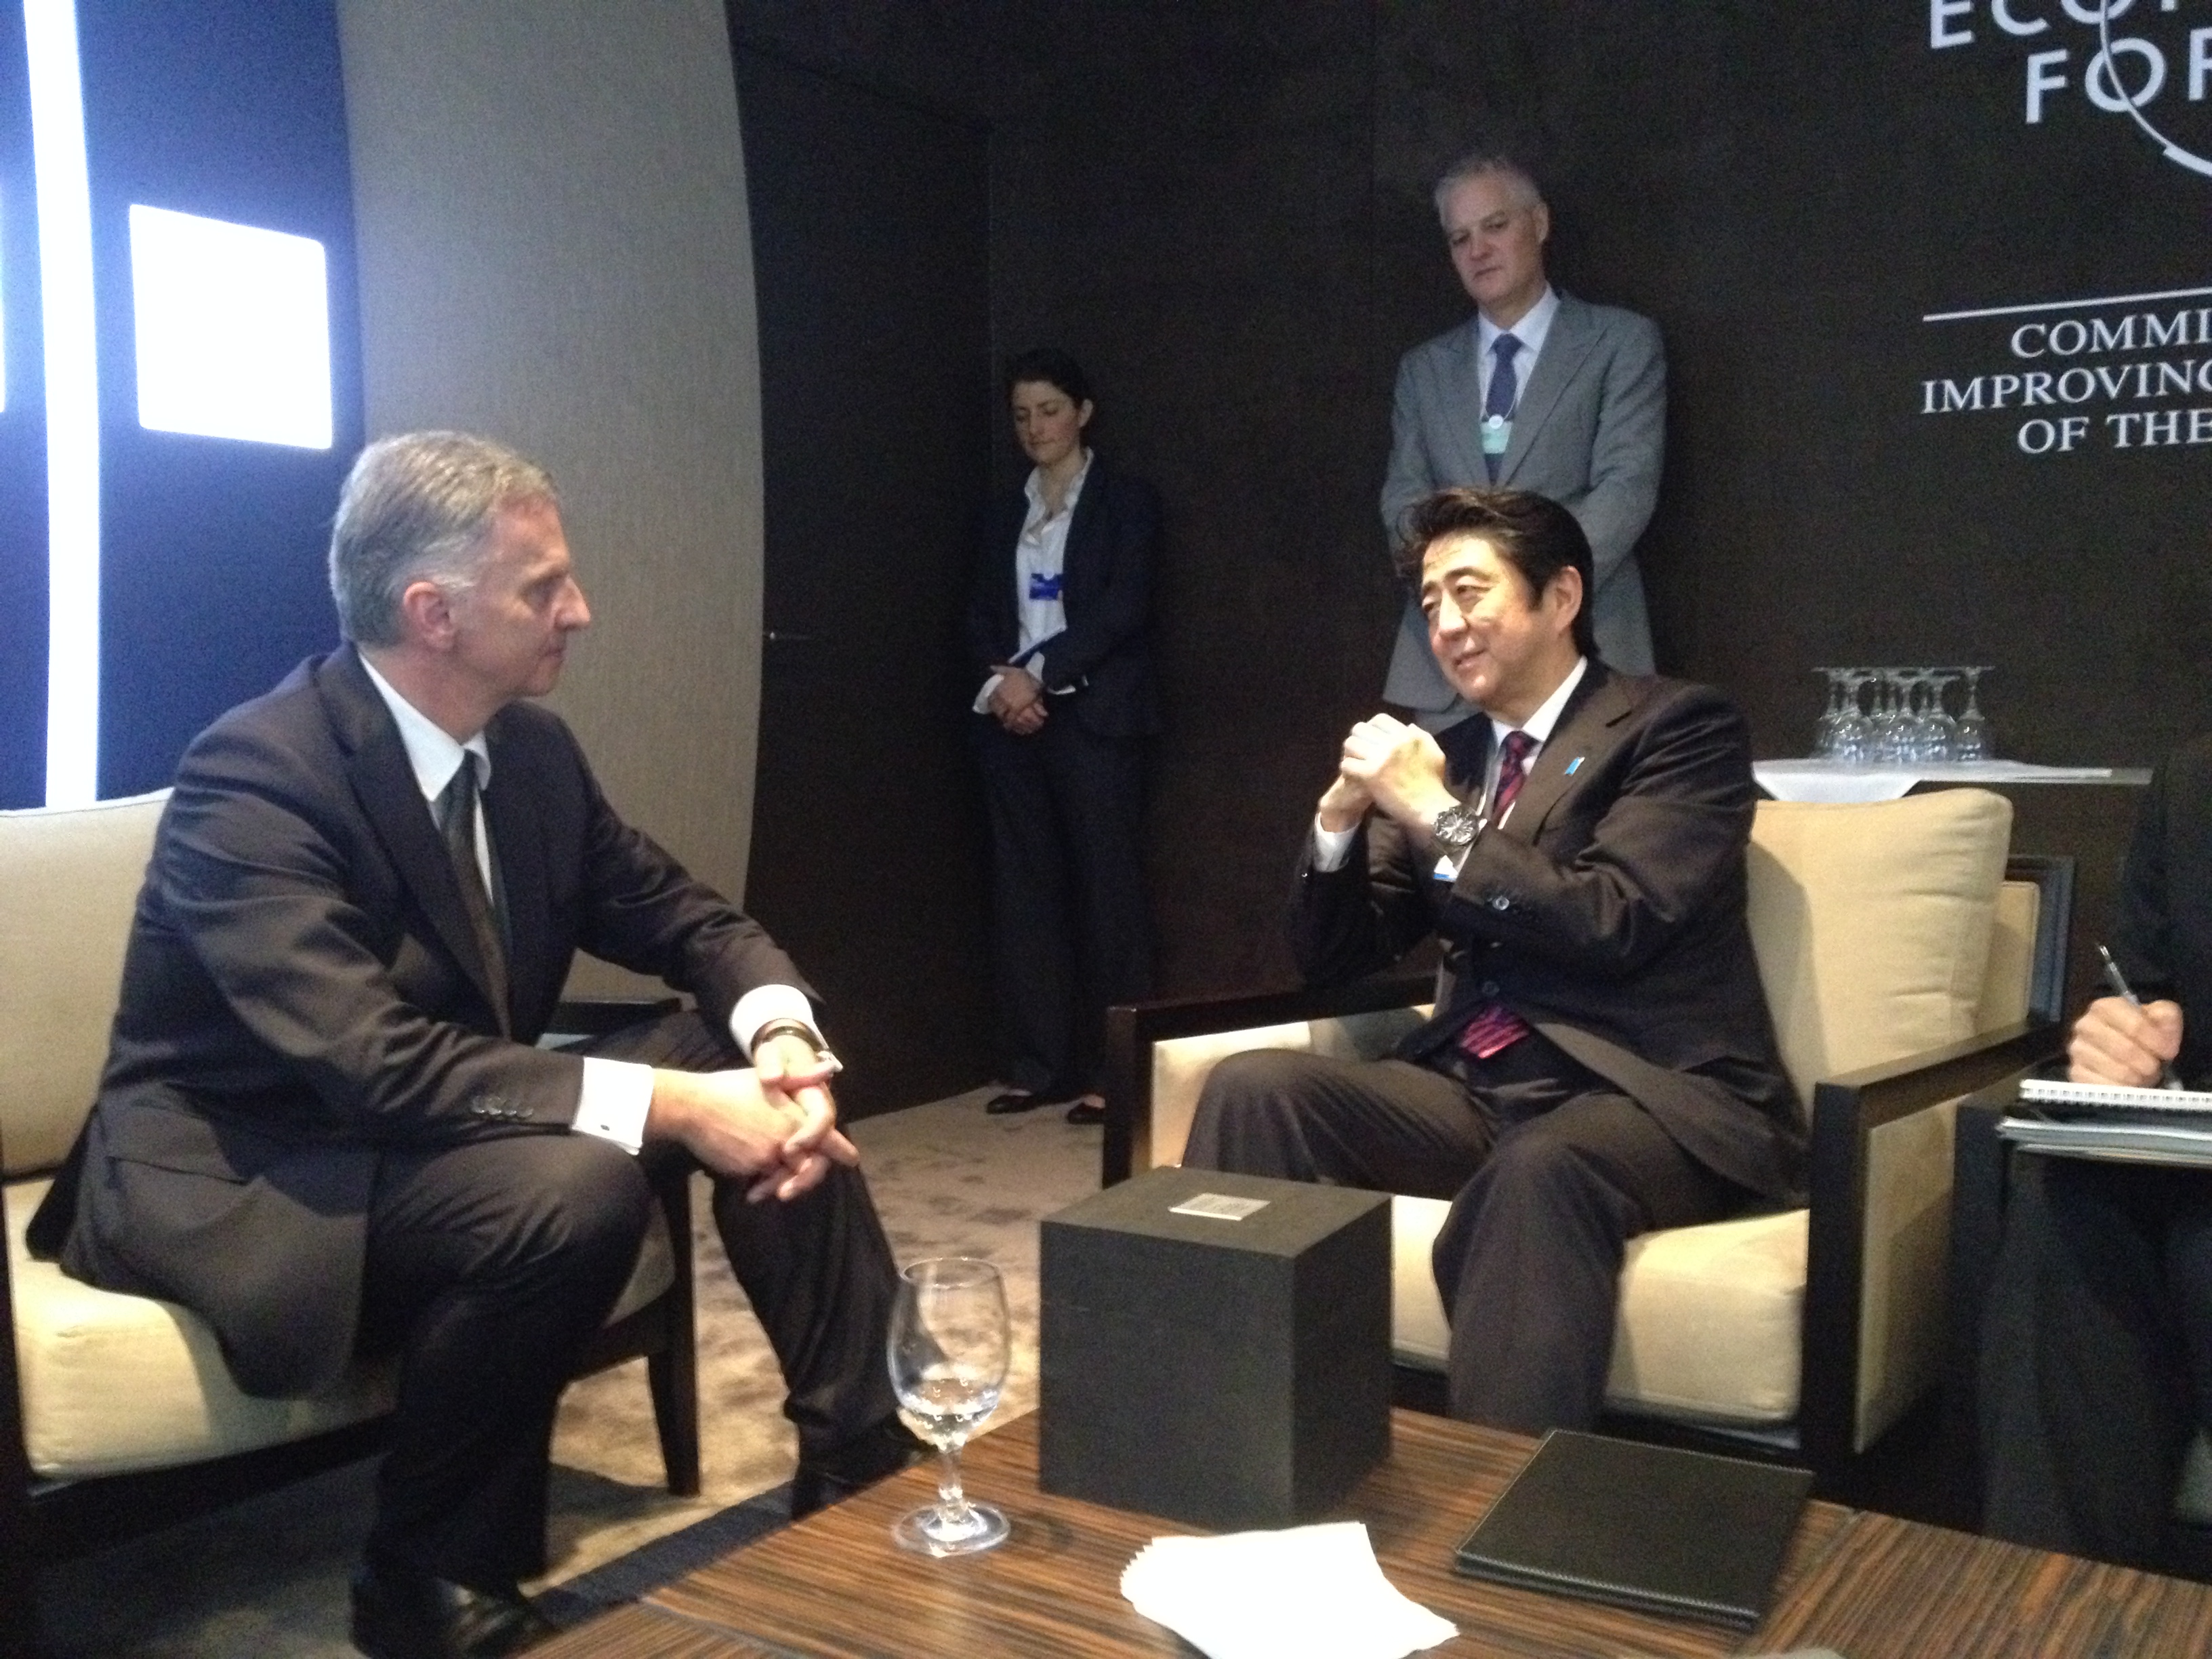 President of the Confederation Didier Burkhalter and the prime minister of Japan, Shinzo Abe.